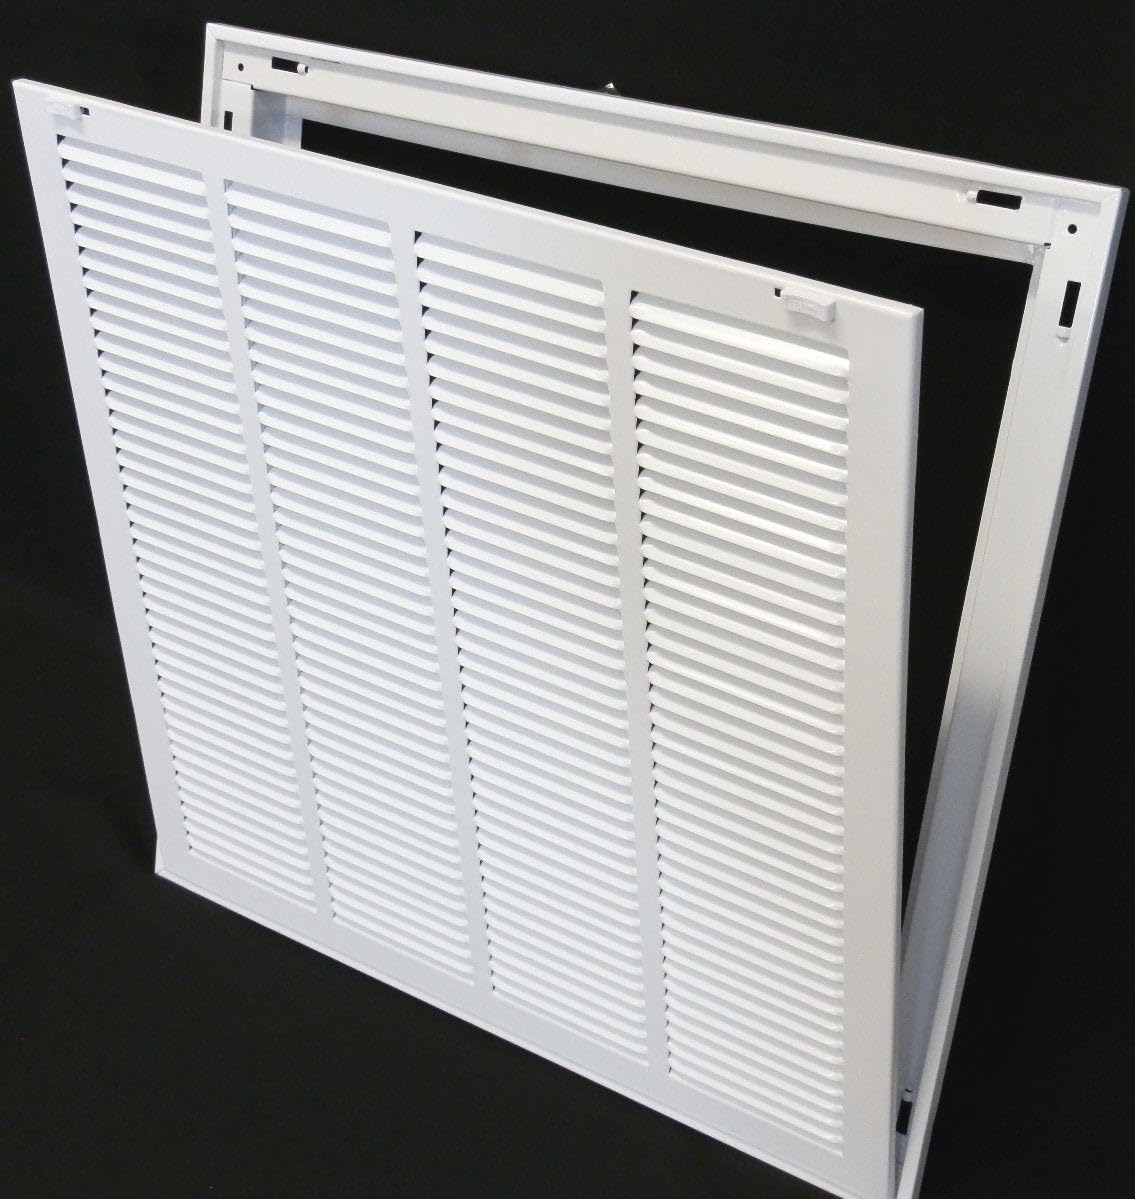 10&quot; X 10&quot; Steel Return Air Filter Grille for 1&quot; Filter - Removable Frame - [Outer Dimensions: 12 5/8&quot; X 12 5/8&quot;]